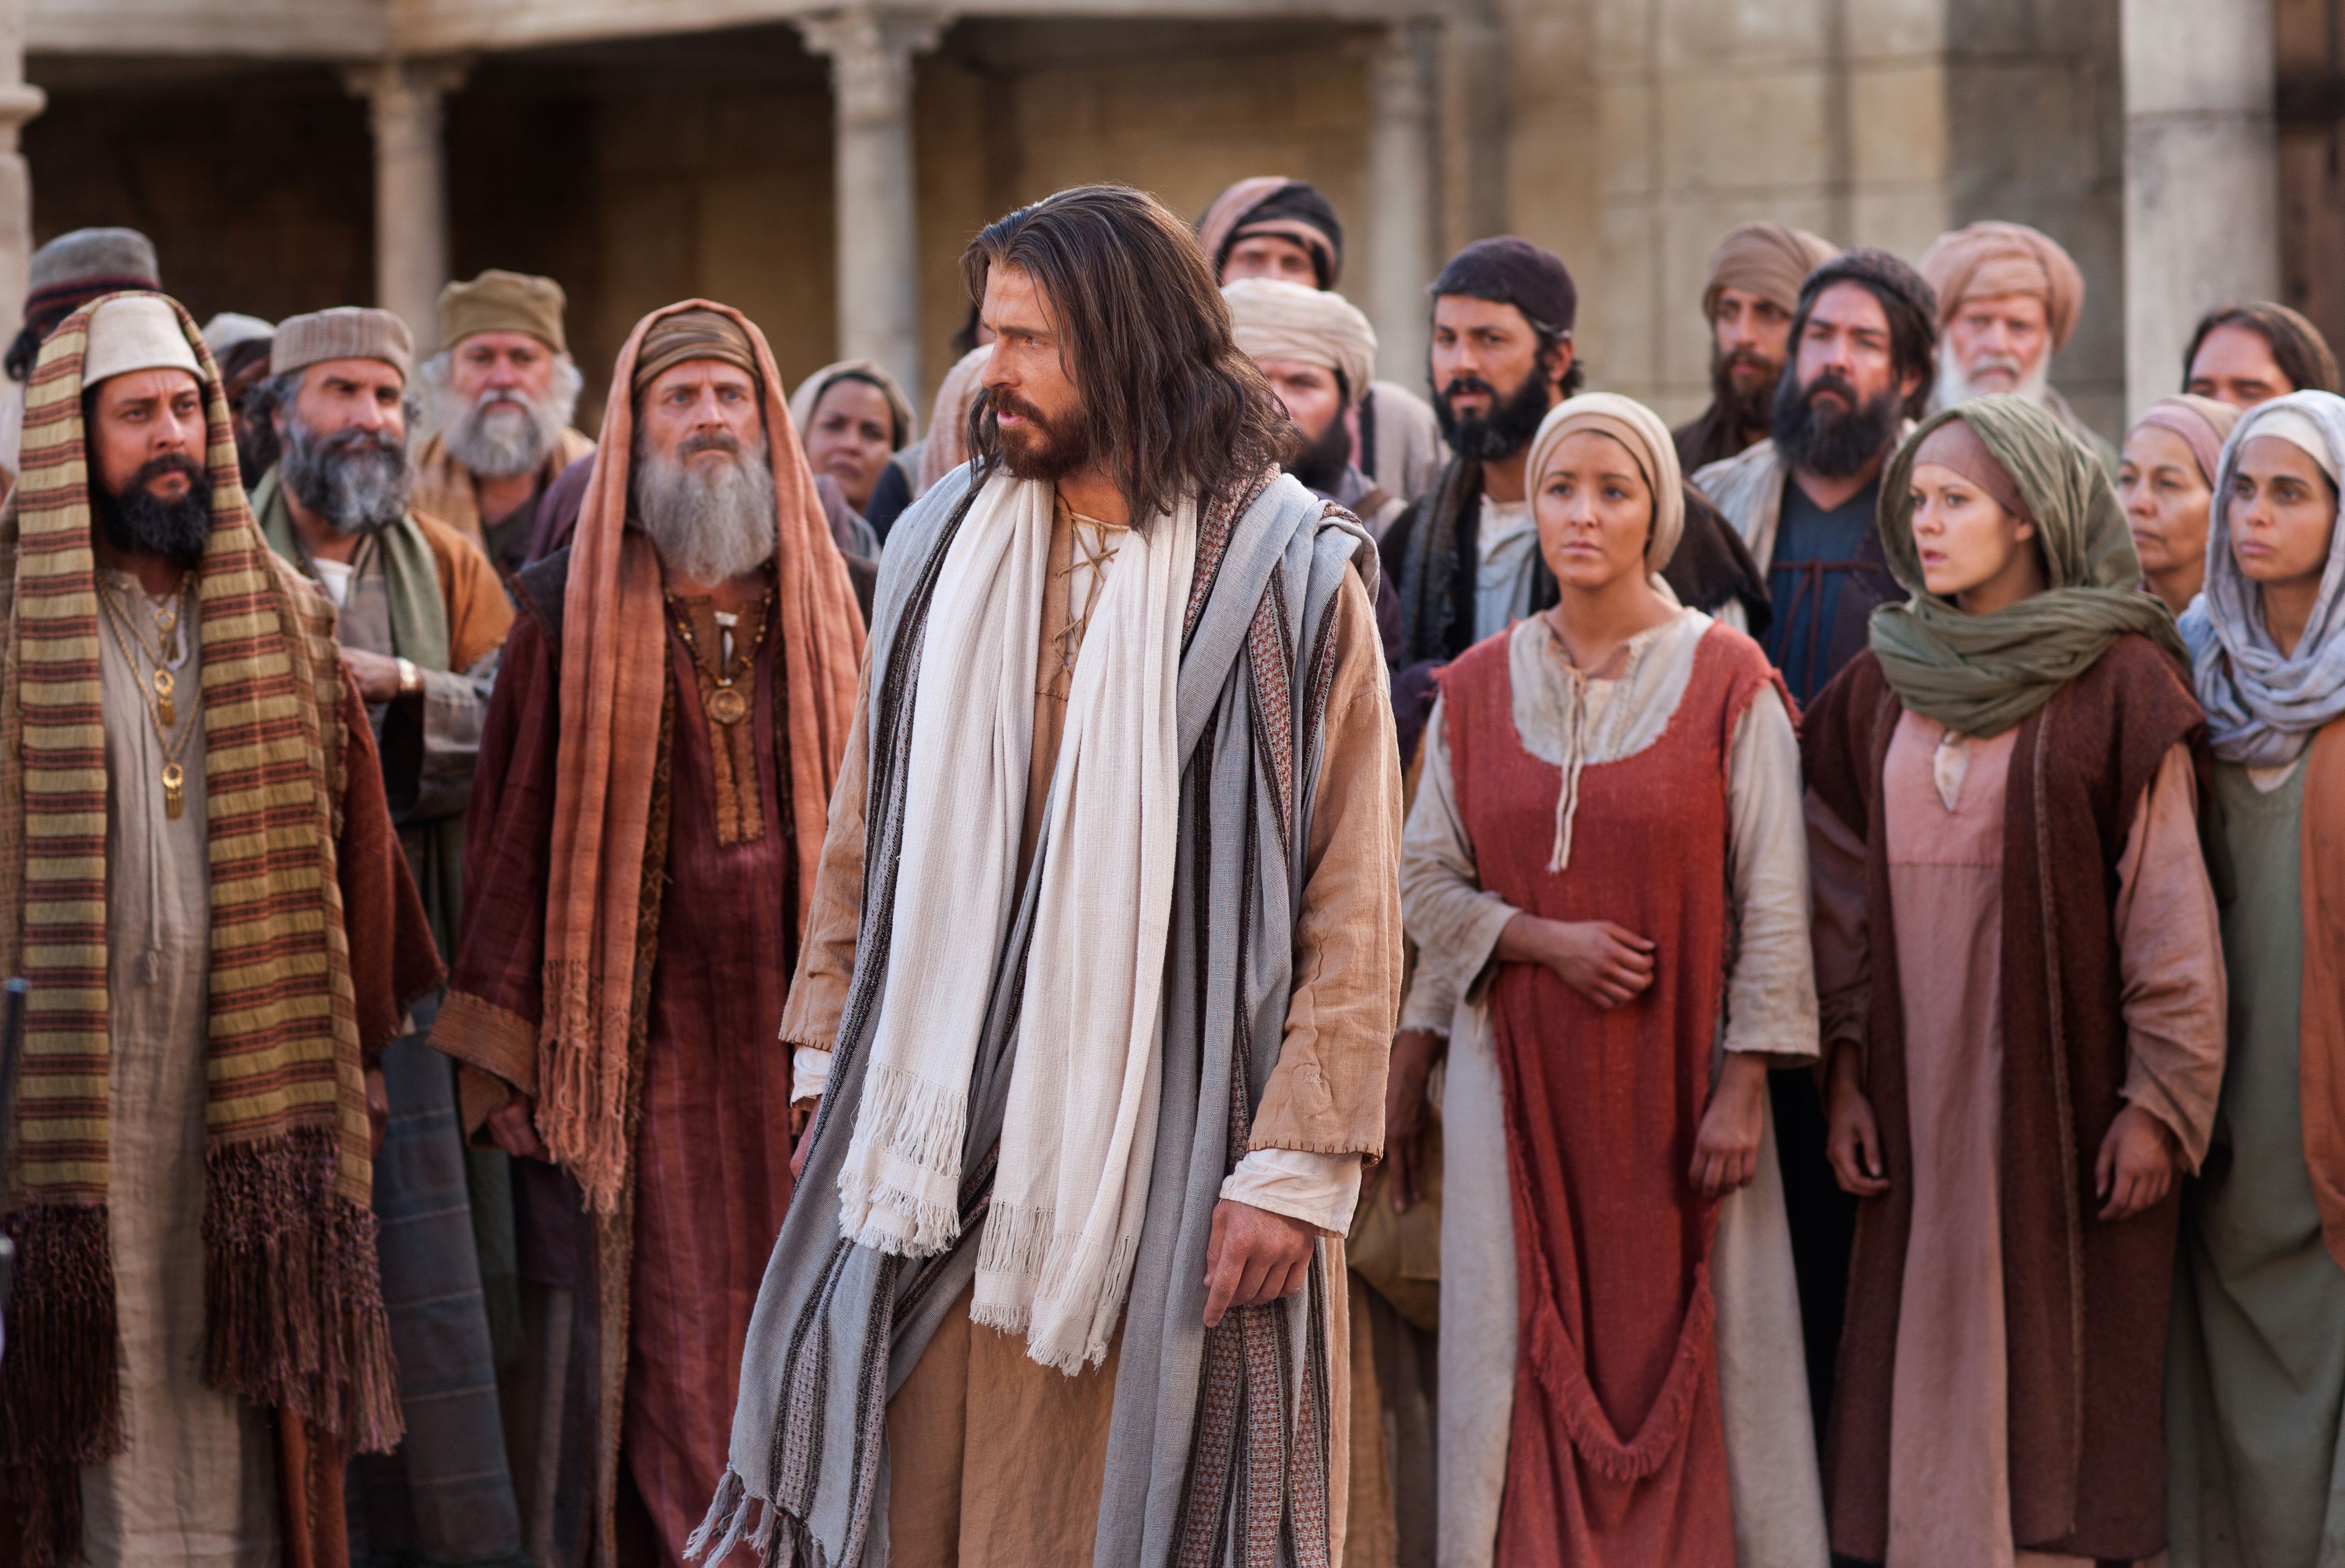 The Pharisees question Jesus and declare that His record is not true.